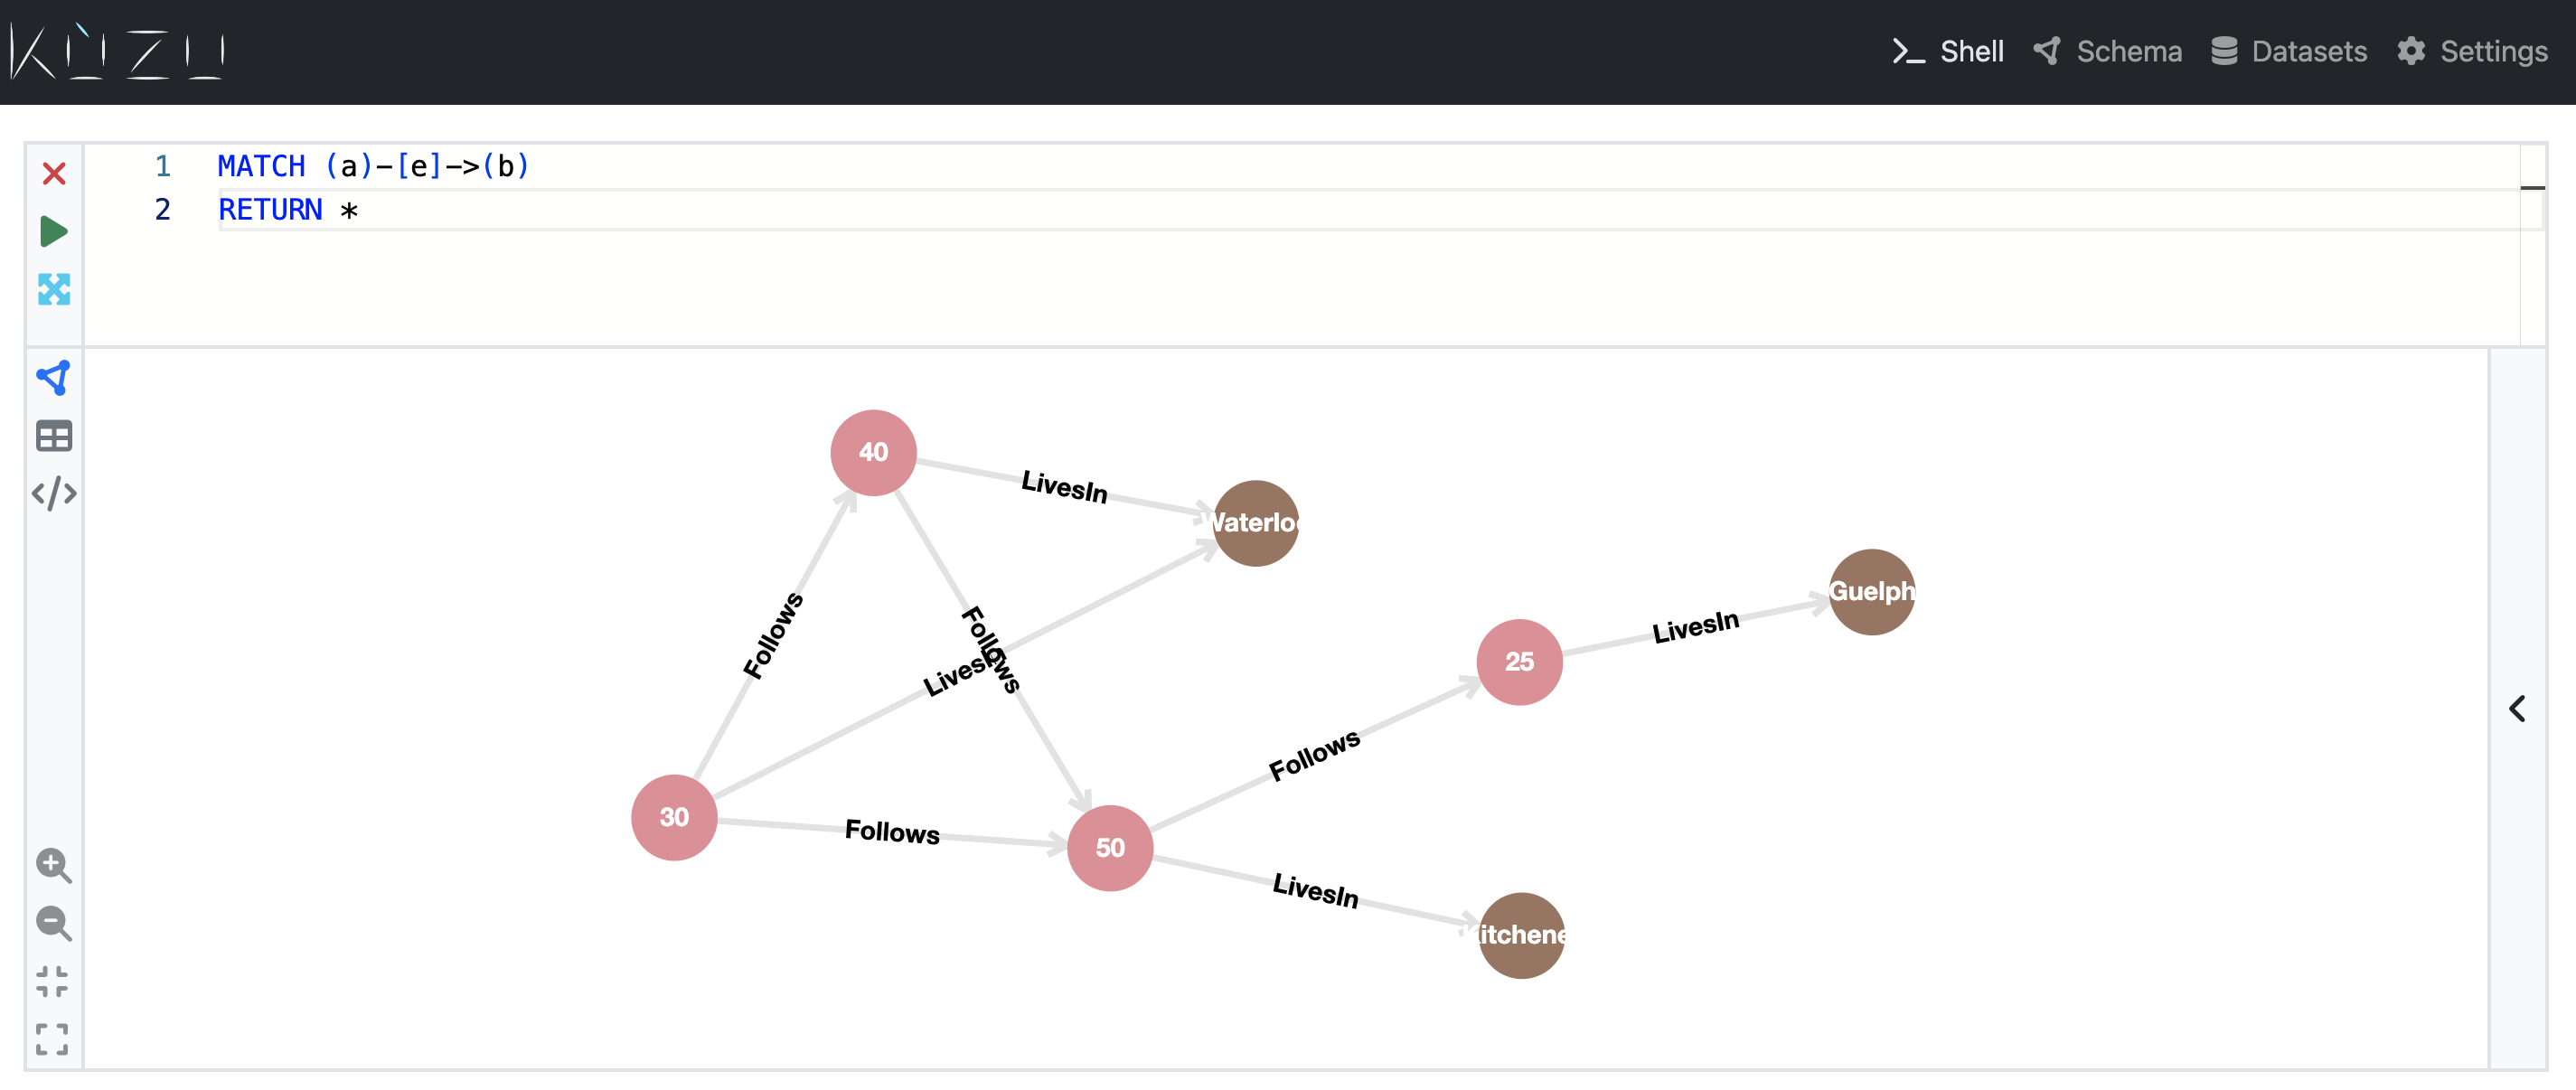 KùzuExplorer: An interactive tool to visualize graph query results and schemas